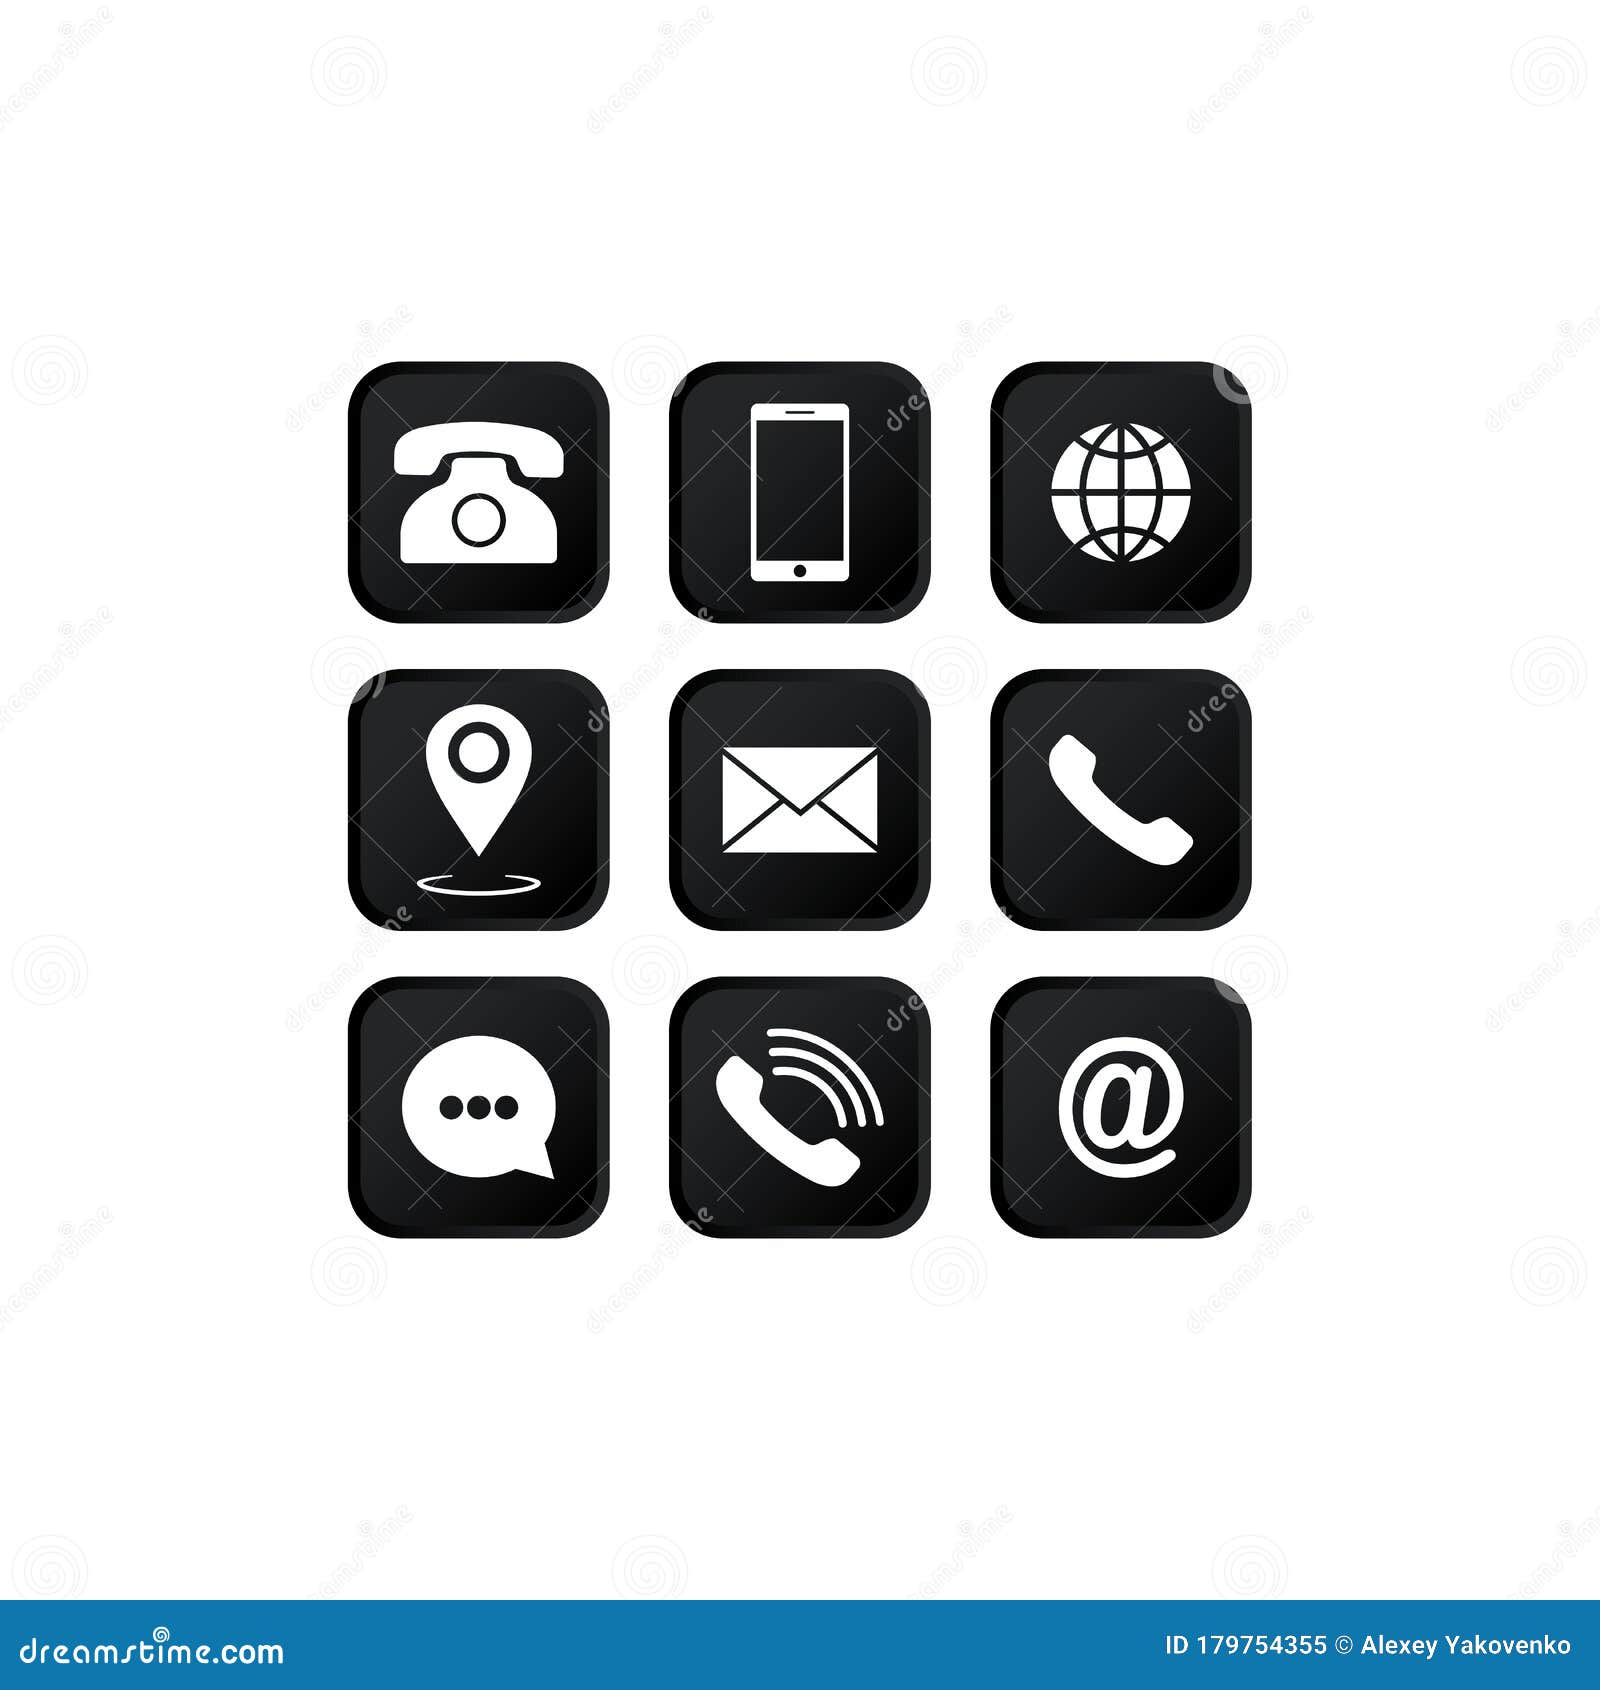 Email - Free communications icons